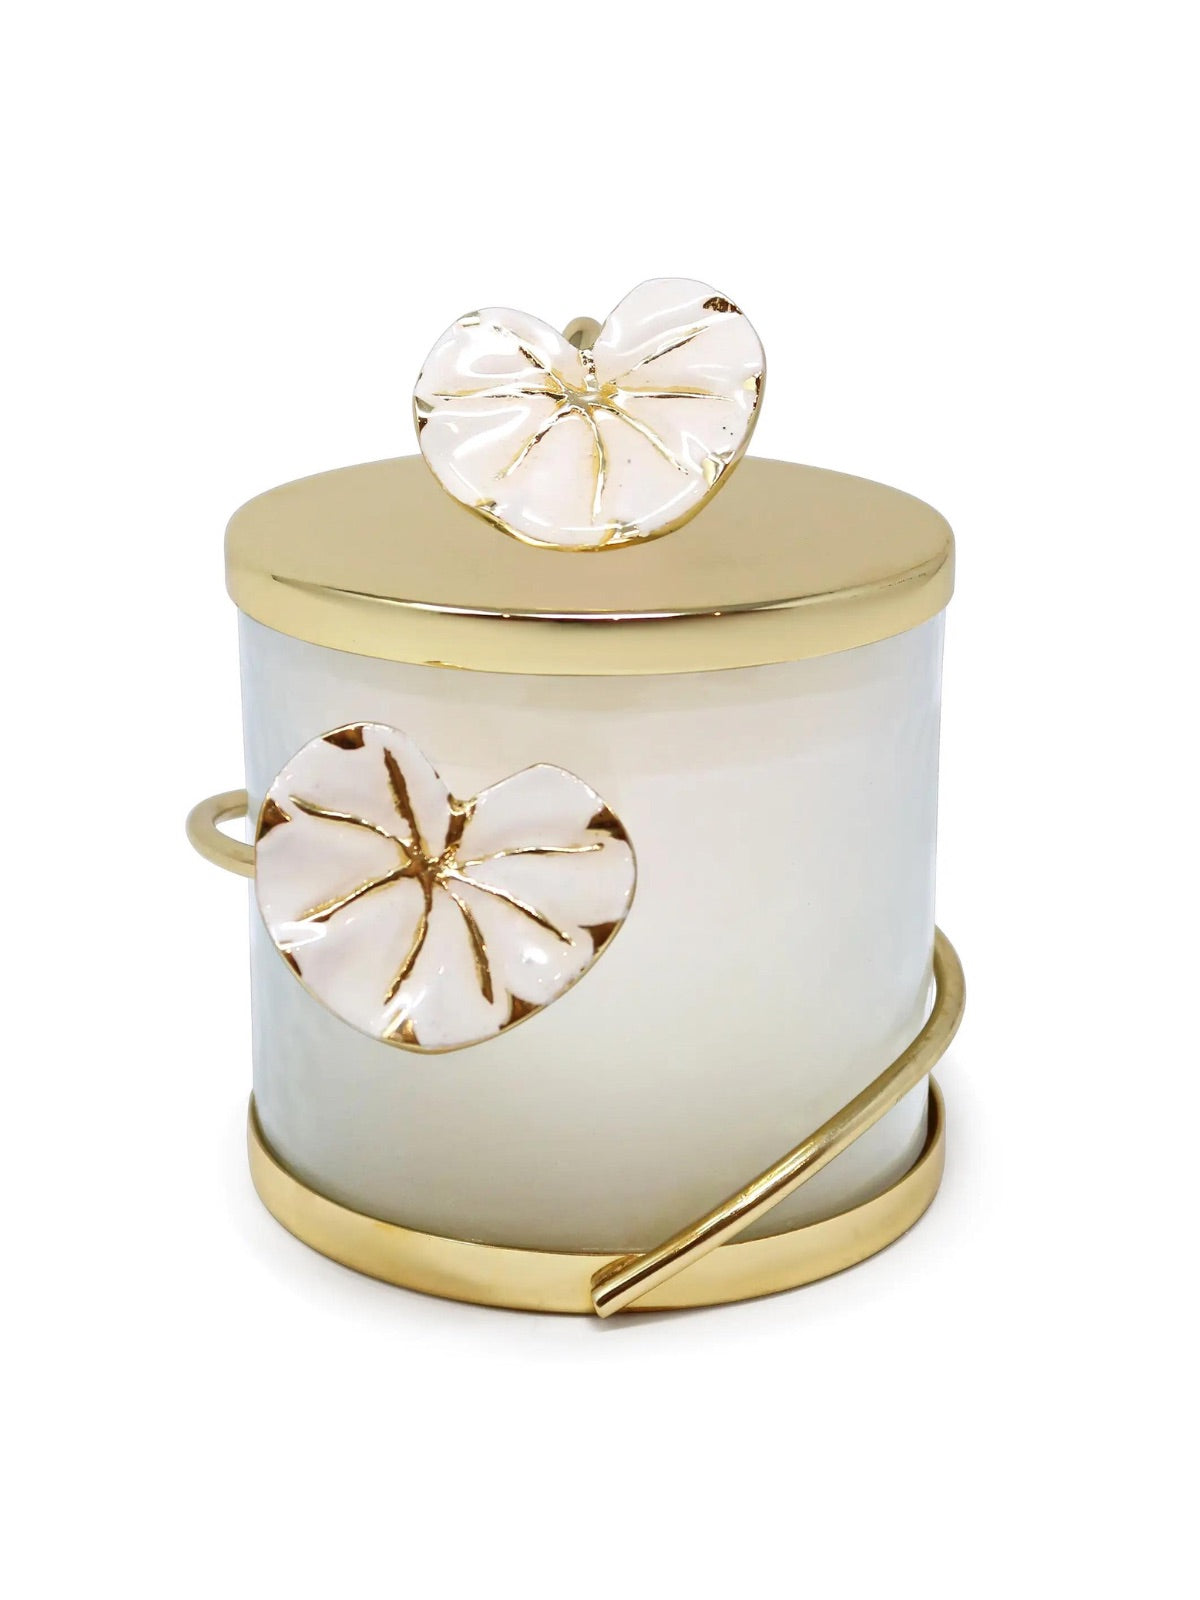 Candle Holder with White and Gold Lotus Design.